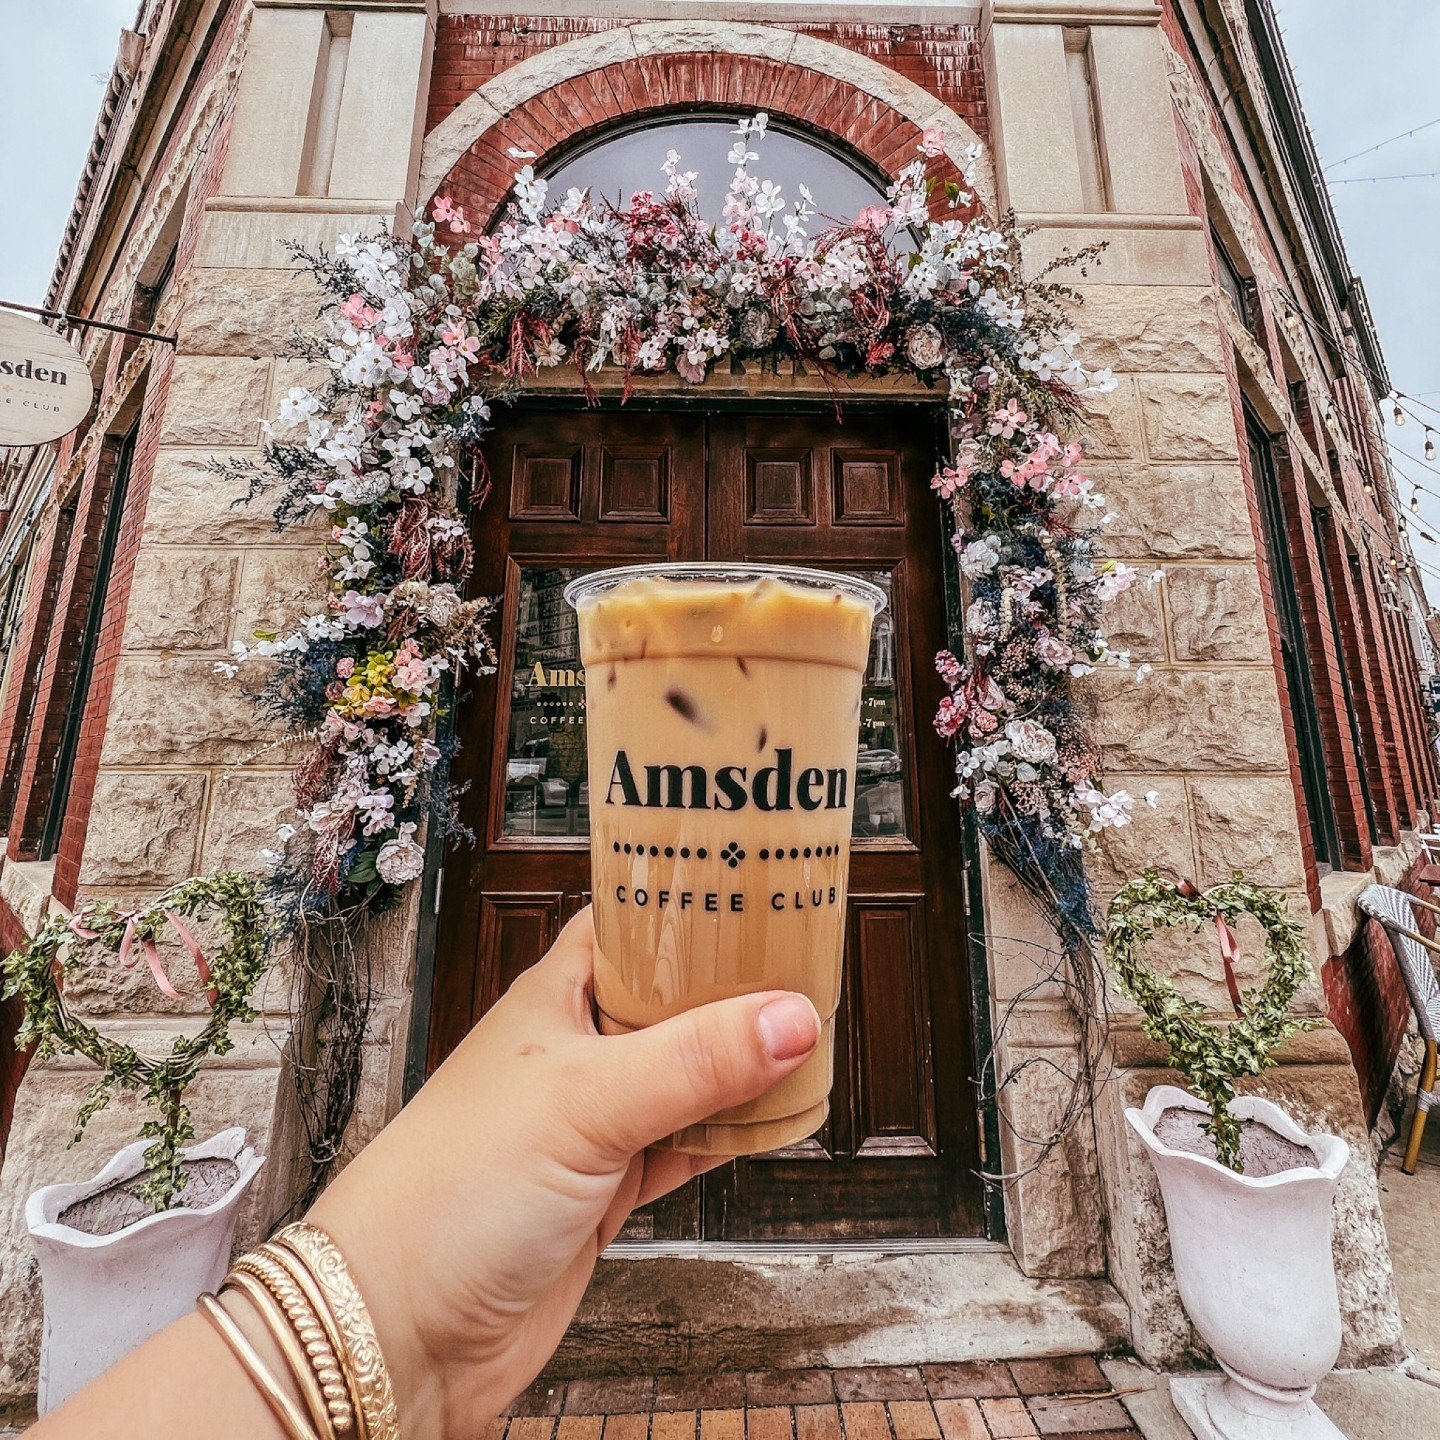 Stepping into the weekend like... ☕️✨ Fueling up with an iced latte from The Amsden to kickstart the Friday feels! Who's ready to conquer the day with a caffeine boost? Let's make today brew-tiful! 😄

theamsden #amsden #amsdencoffeeclub #gathermerca